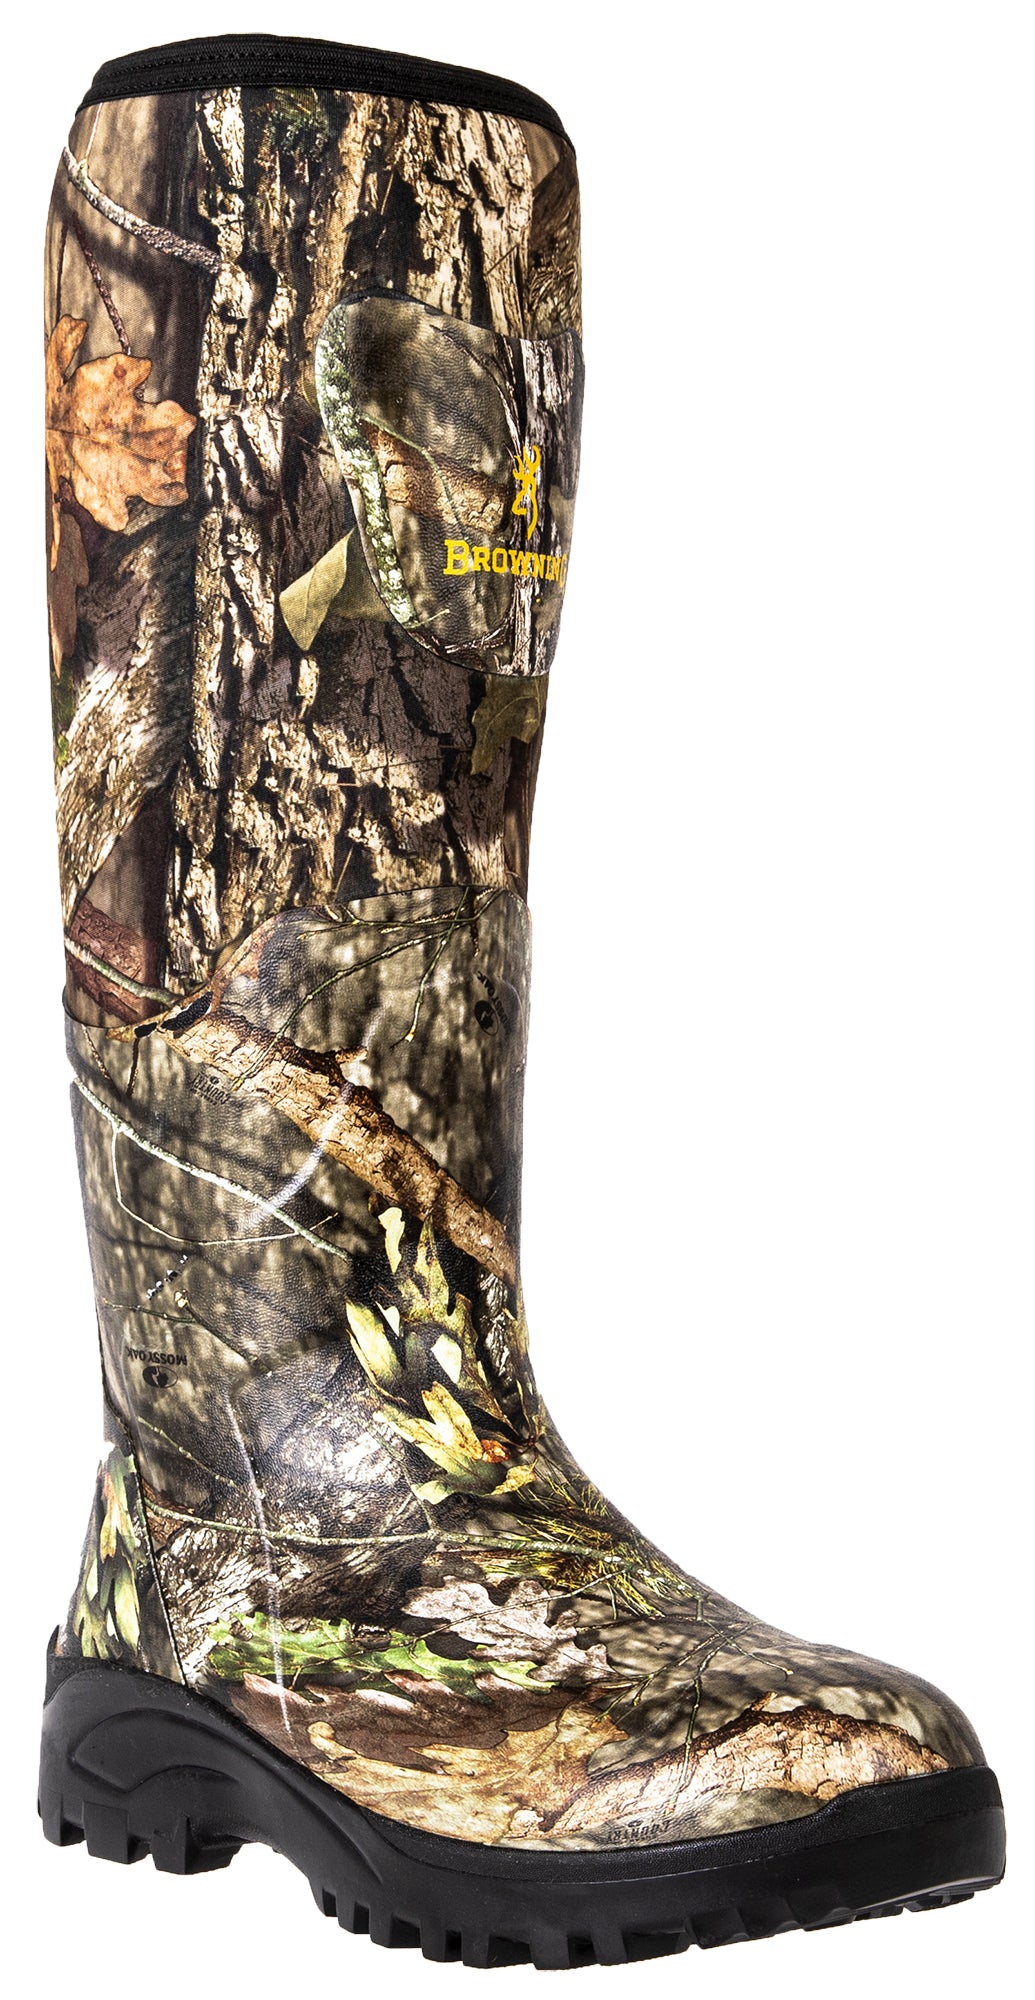 Browning "Invector Neo" men's hunting boots